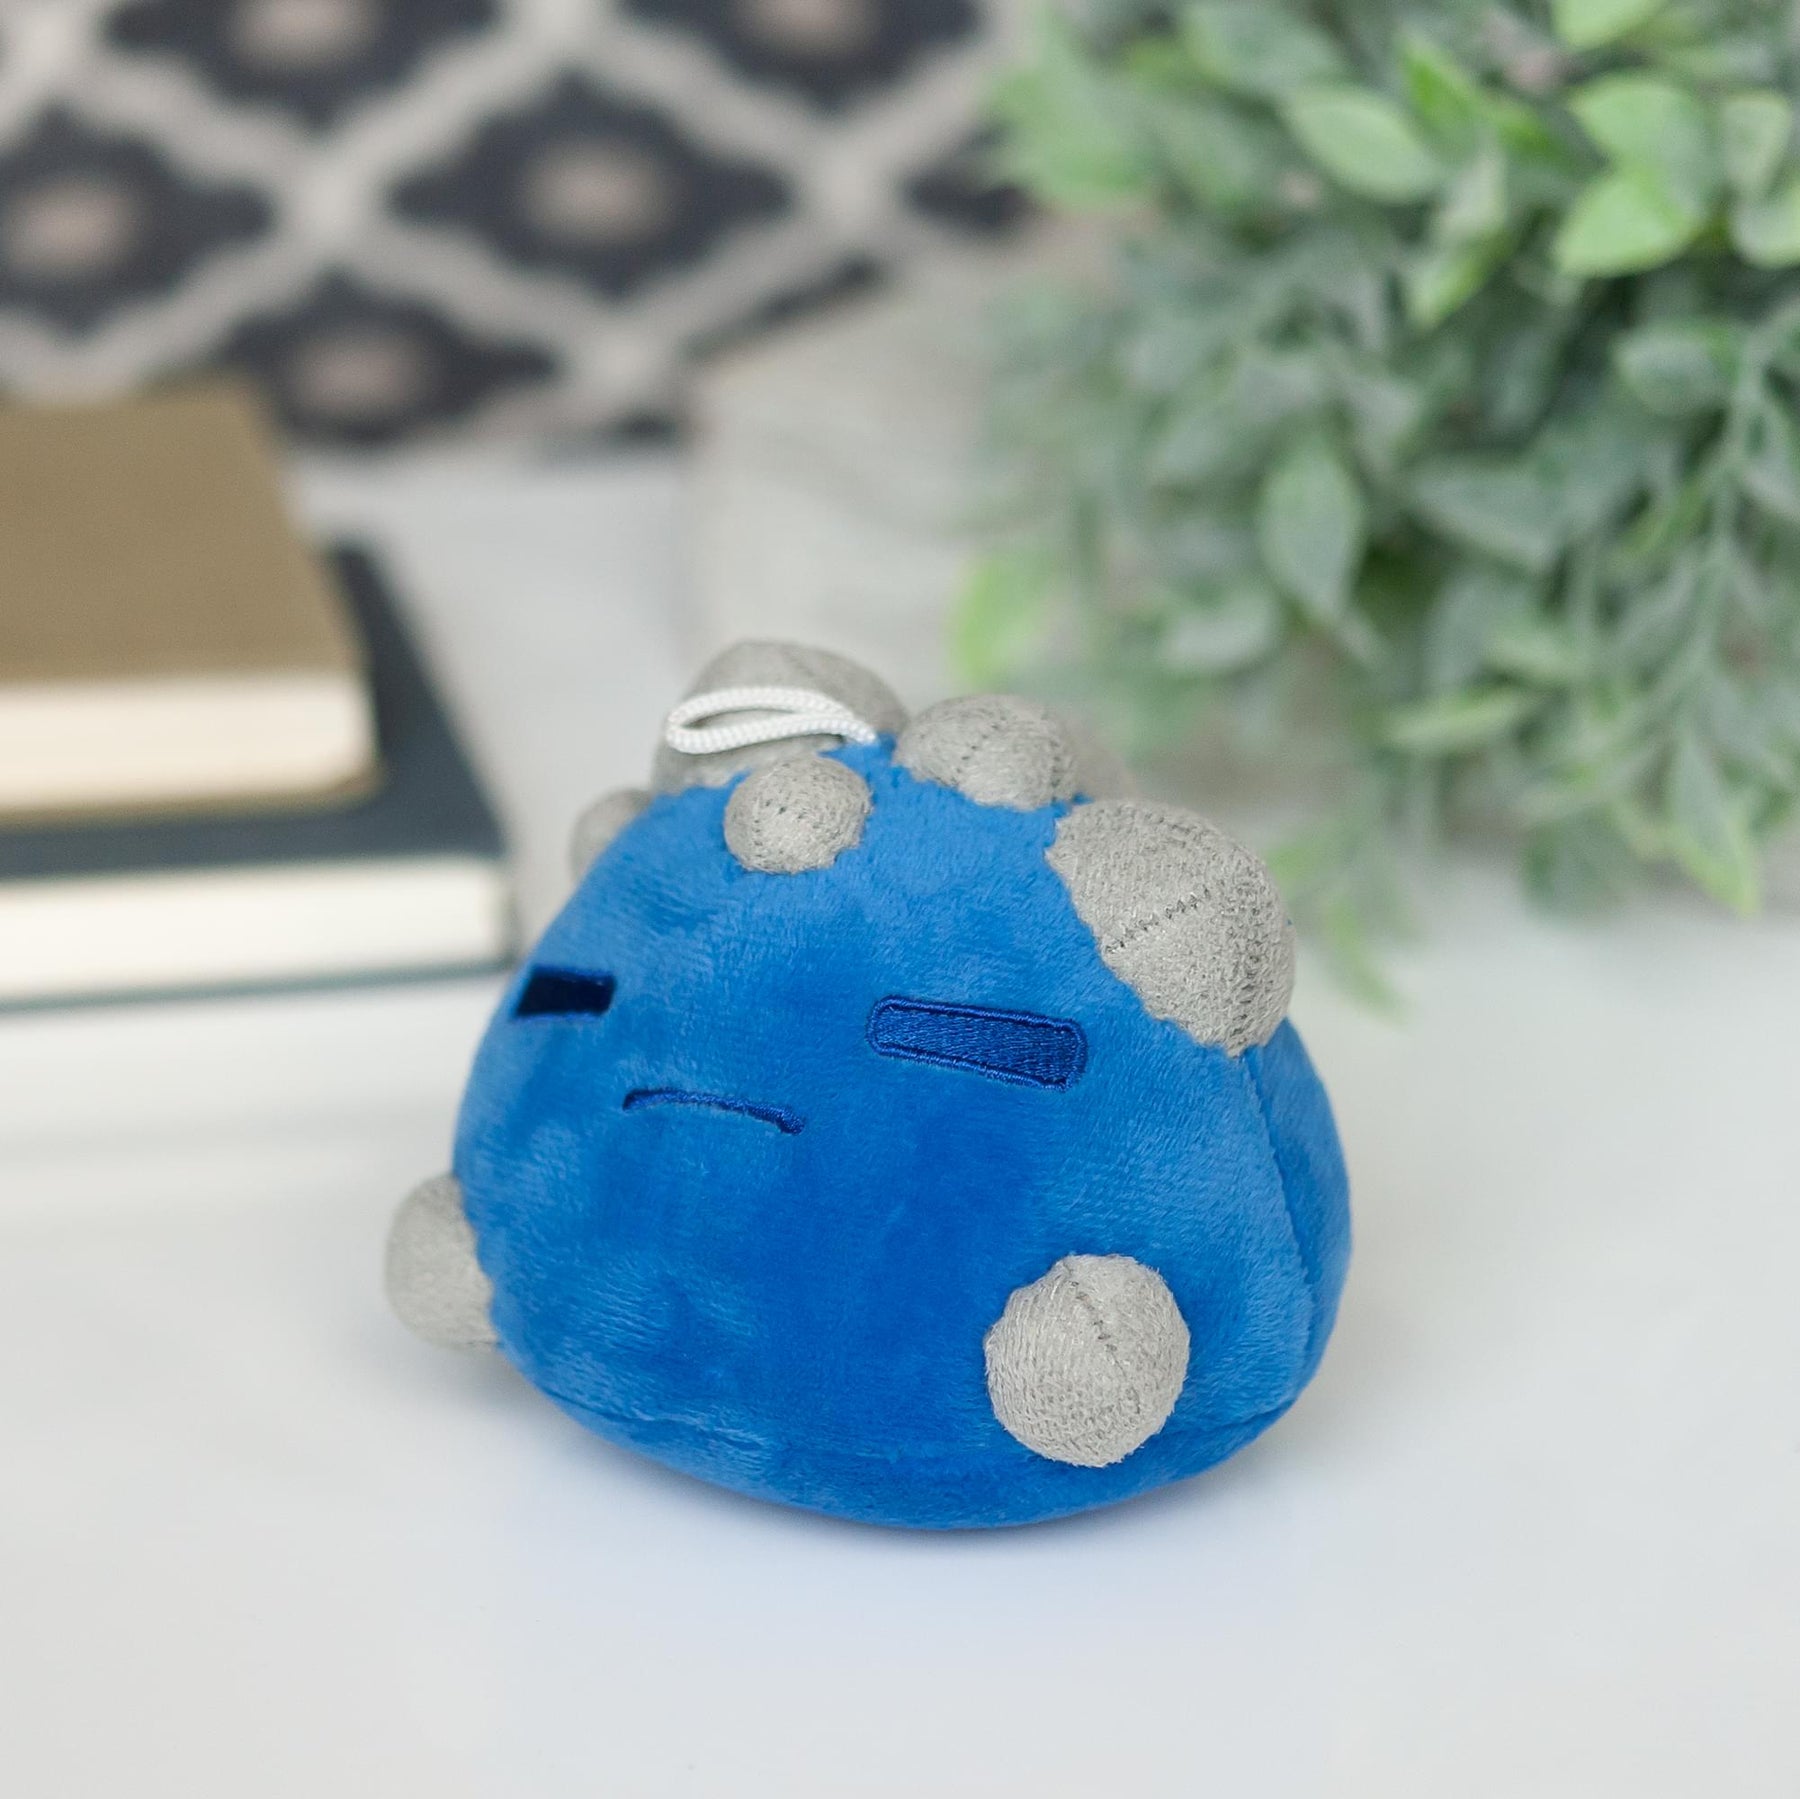 Slime Rancher Plush Toy Bean Bag Plushie | Rock, by Imaginary People